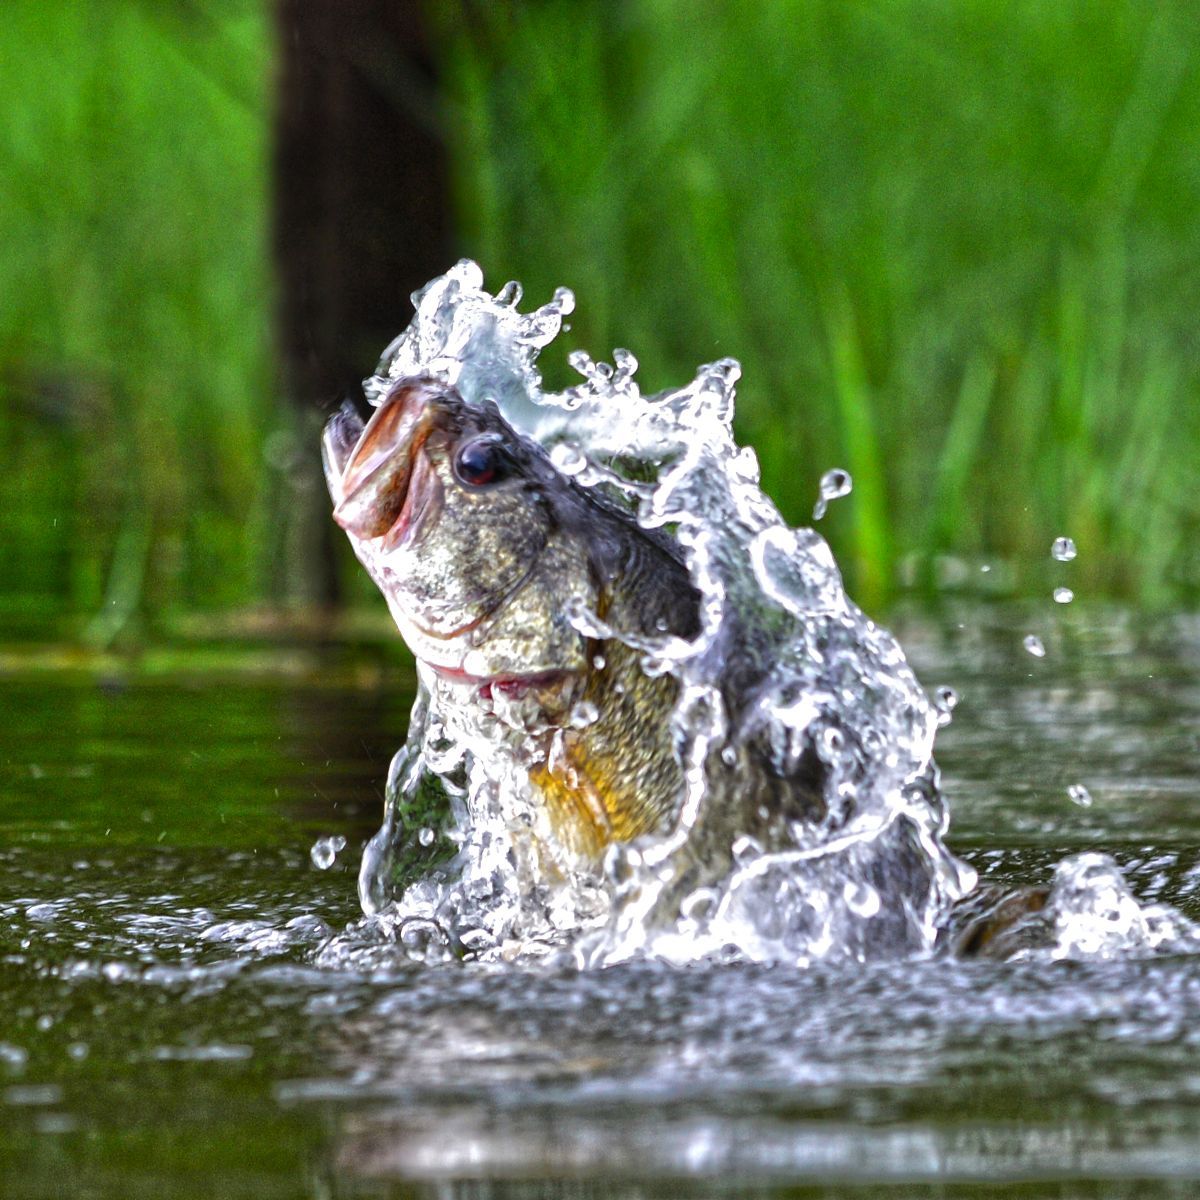 fish jumping out of water meaning